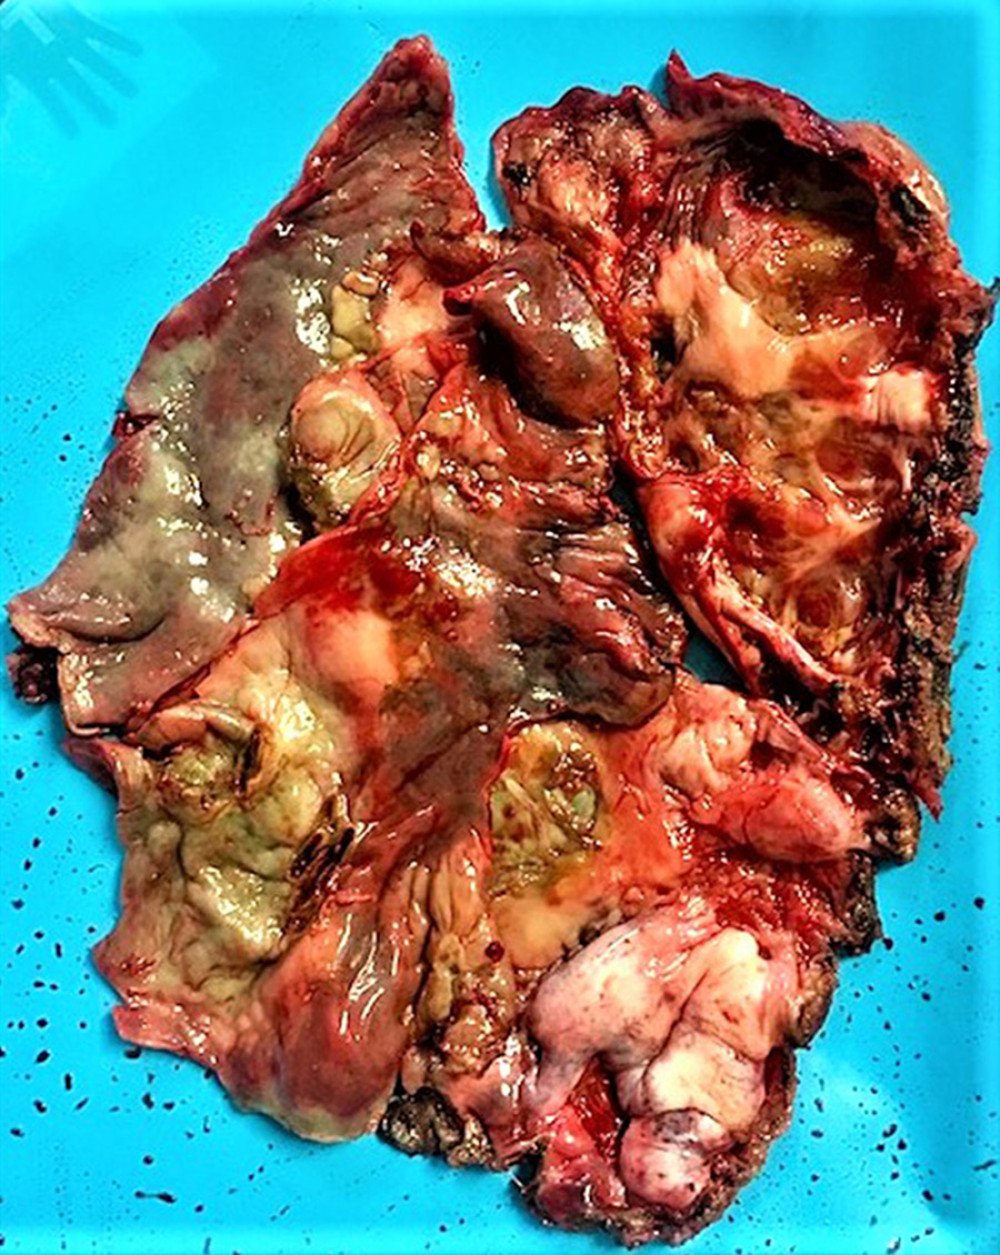 Gross aspect of the cyst showing a glistering inner surface with heavily trabeculated appearance (resembling endocardium).